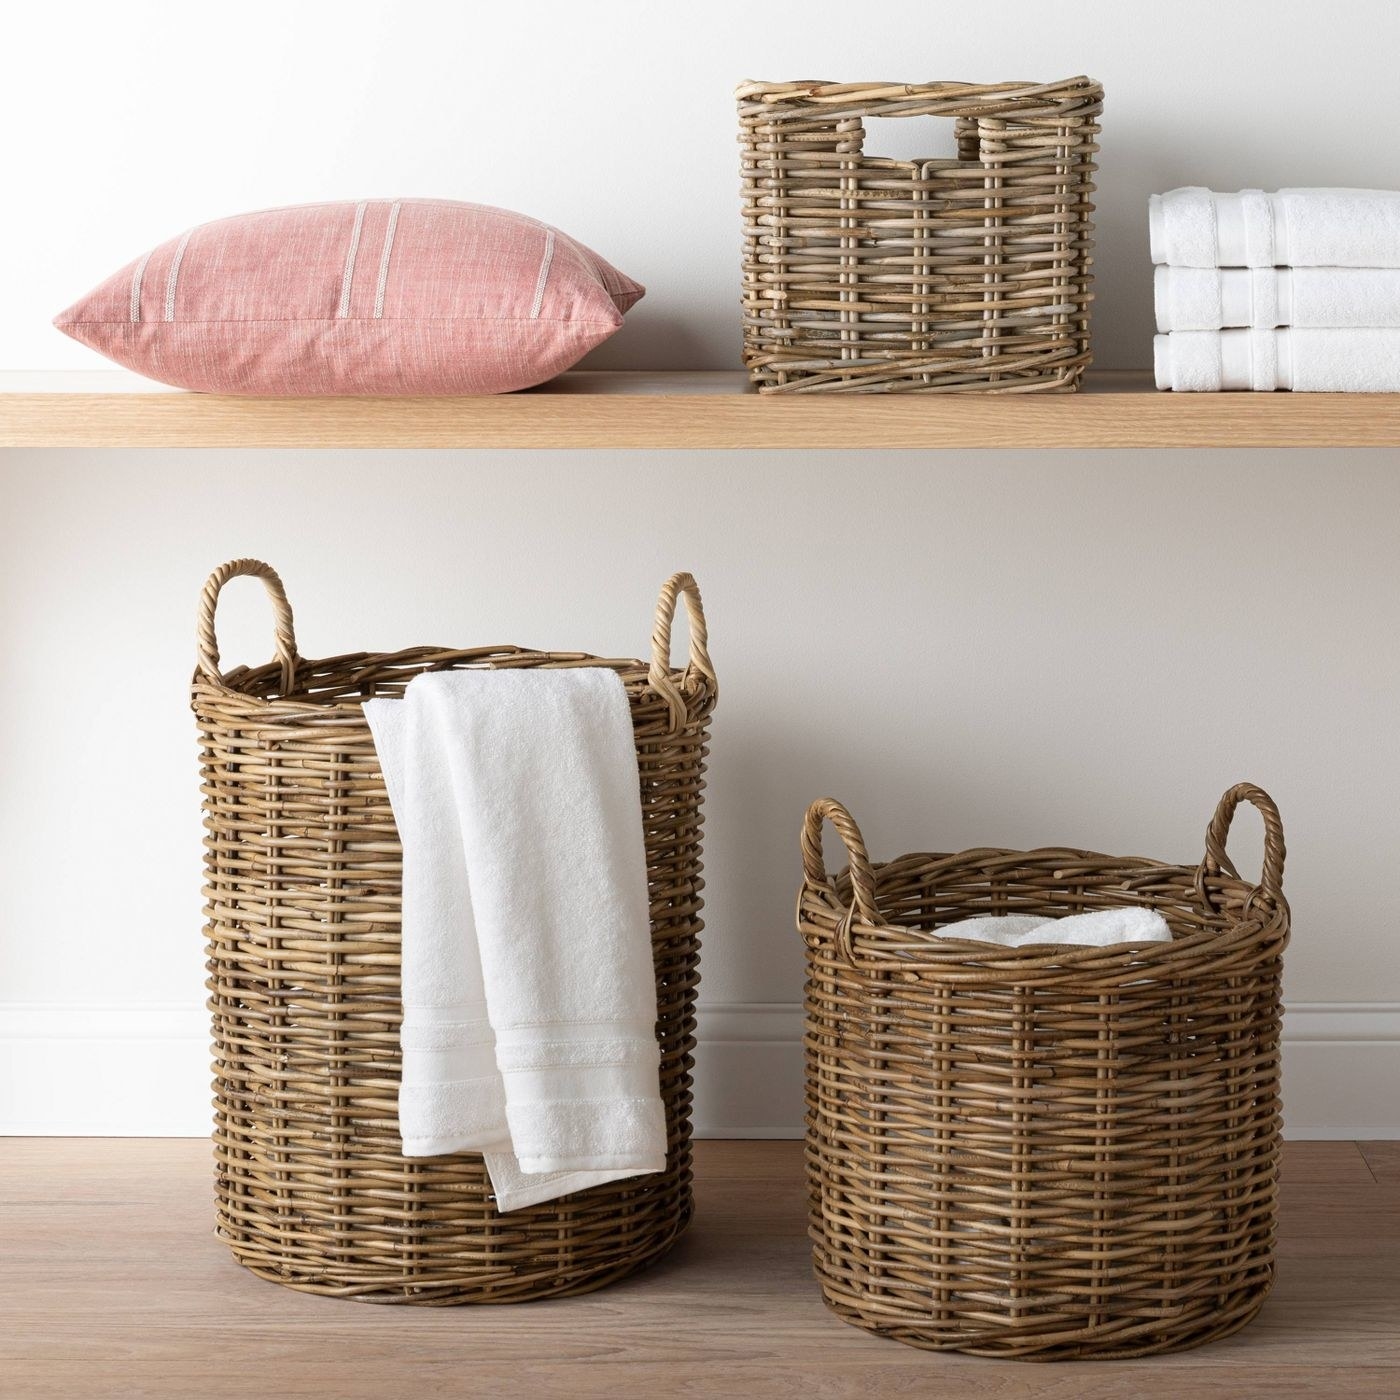 brown/gray round rattan baskets on the floor with towels inside